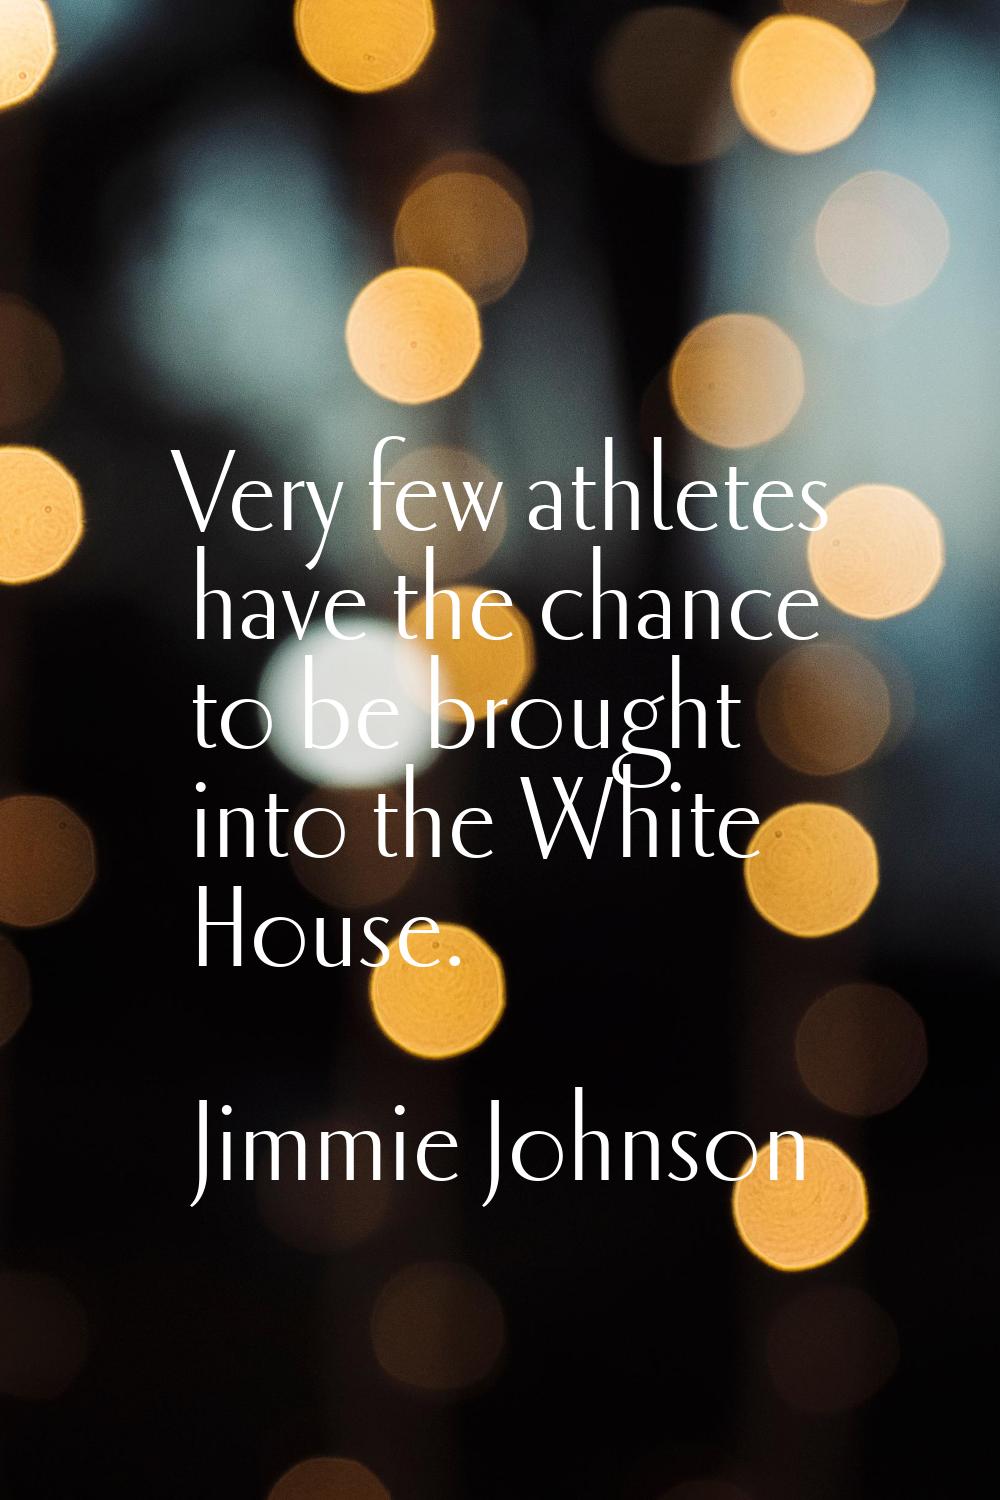 Very few athletes have the chance to be brought into the White House.